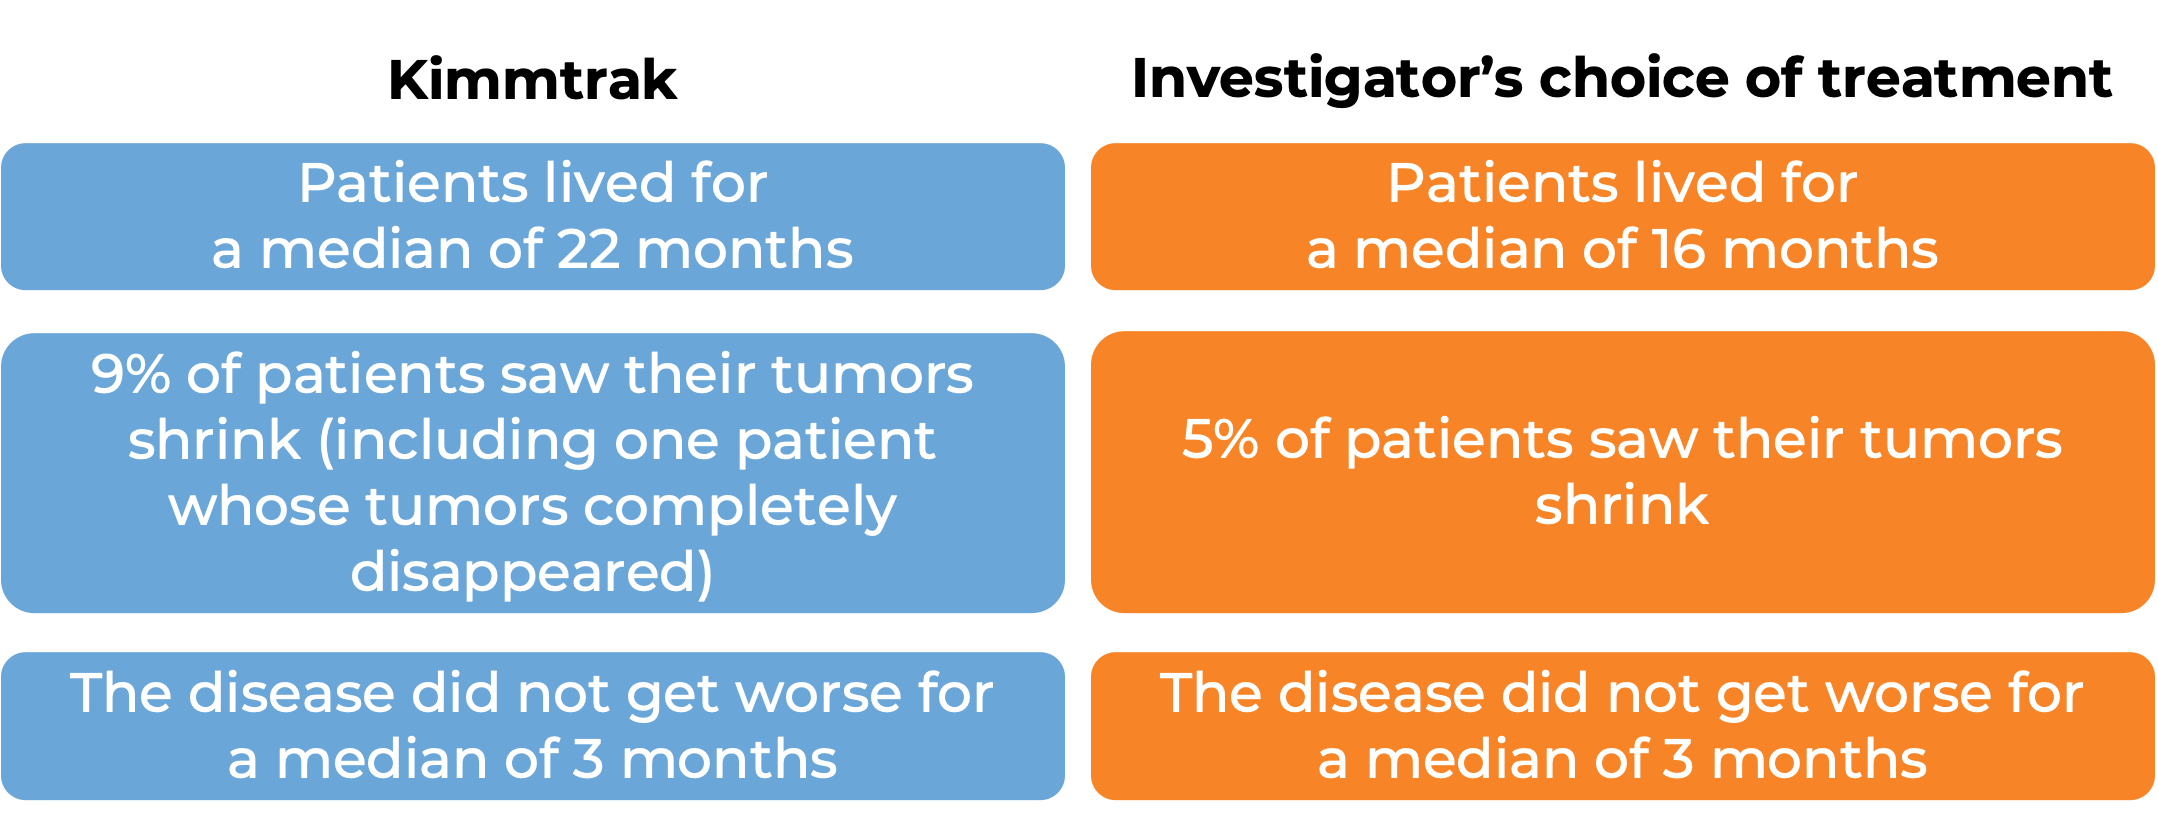 Results after treatment with Kimmtrak vs investigator's choice of treatment (diagram)